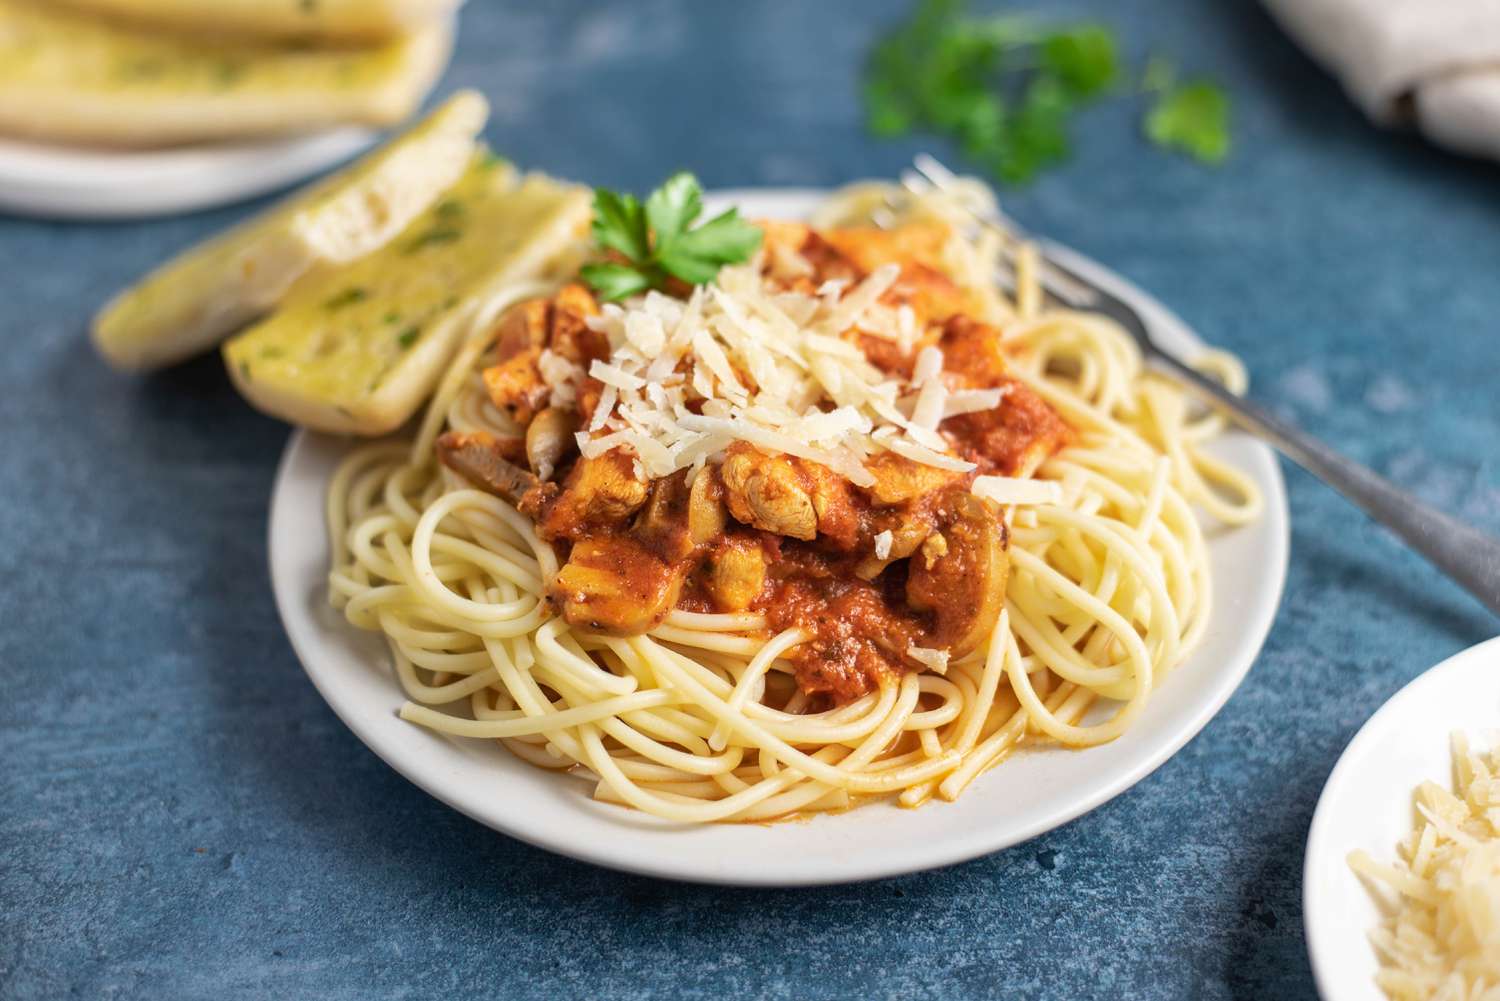 Can you put raw chicken in spaghetti sauce?